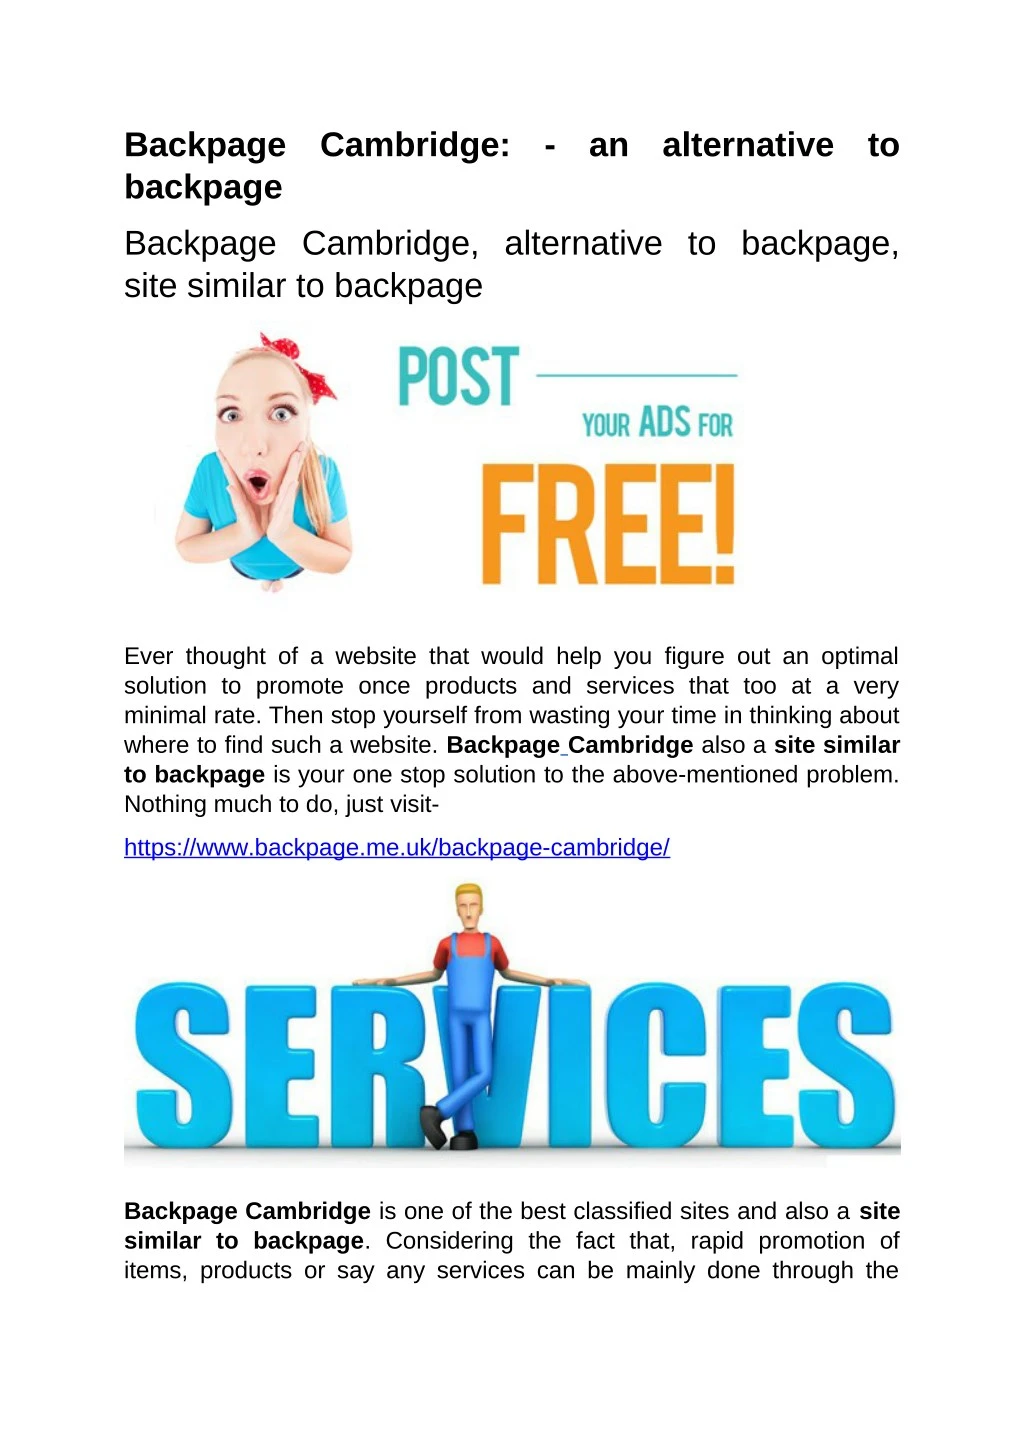 backpage cambridge an alternative to backpage